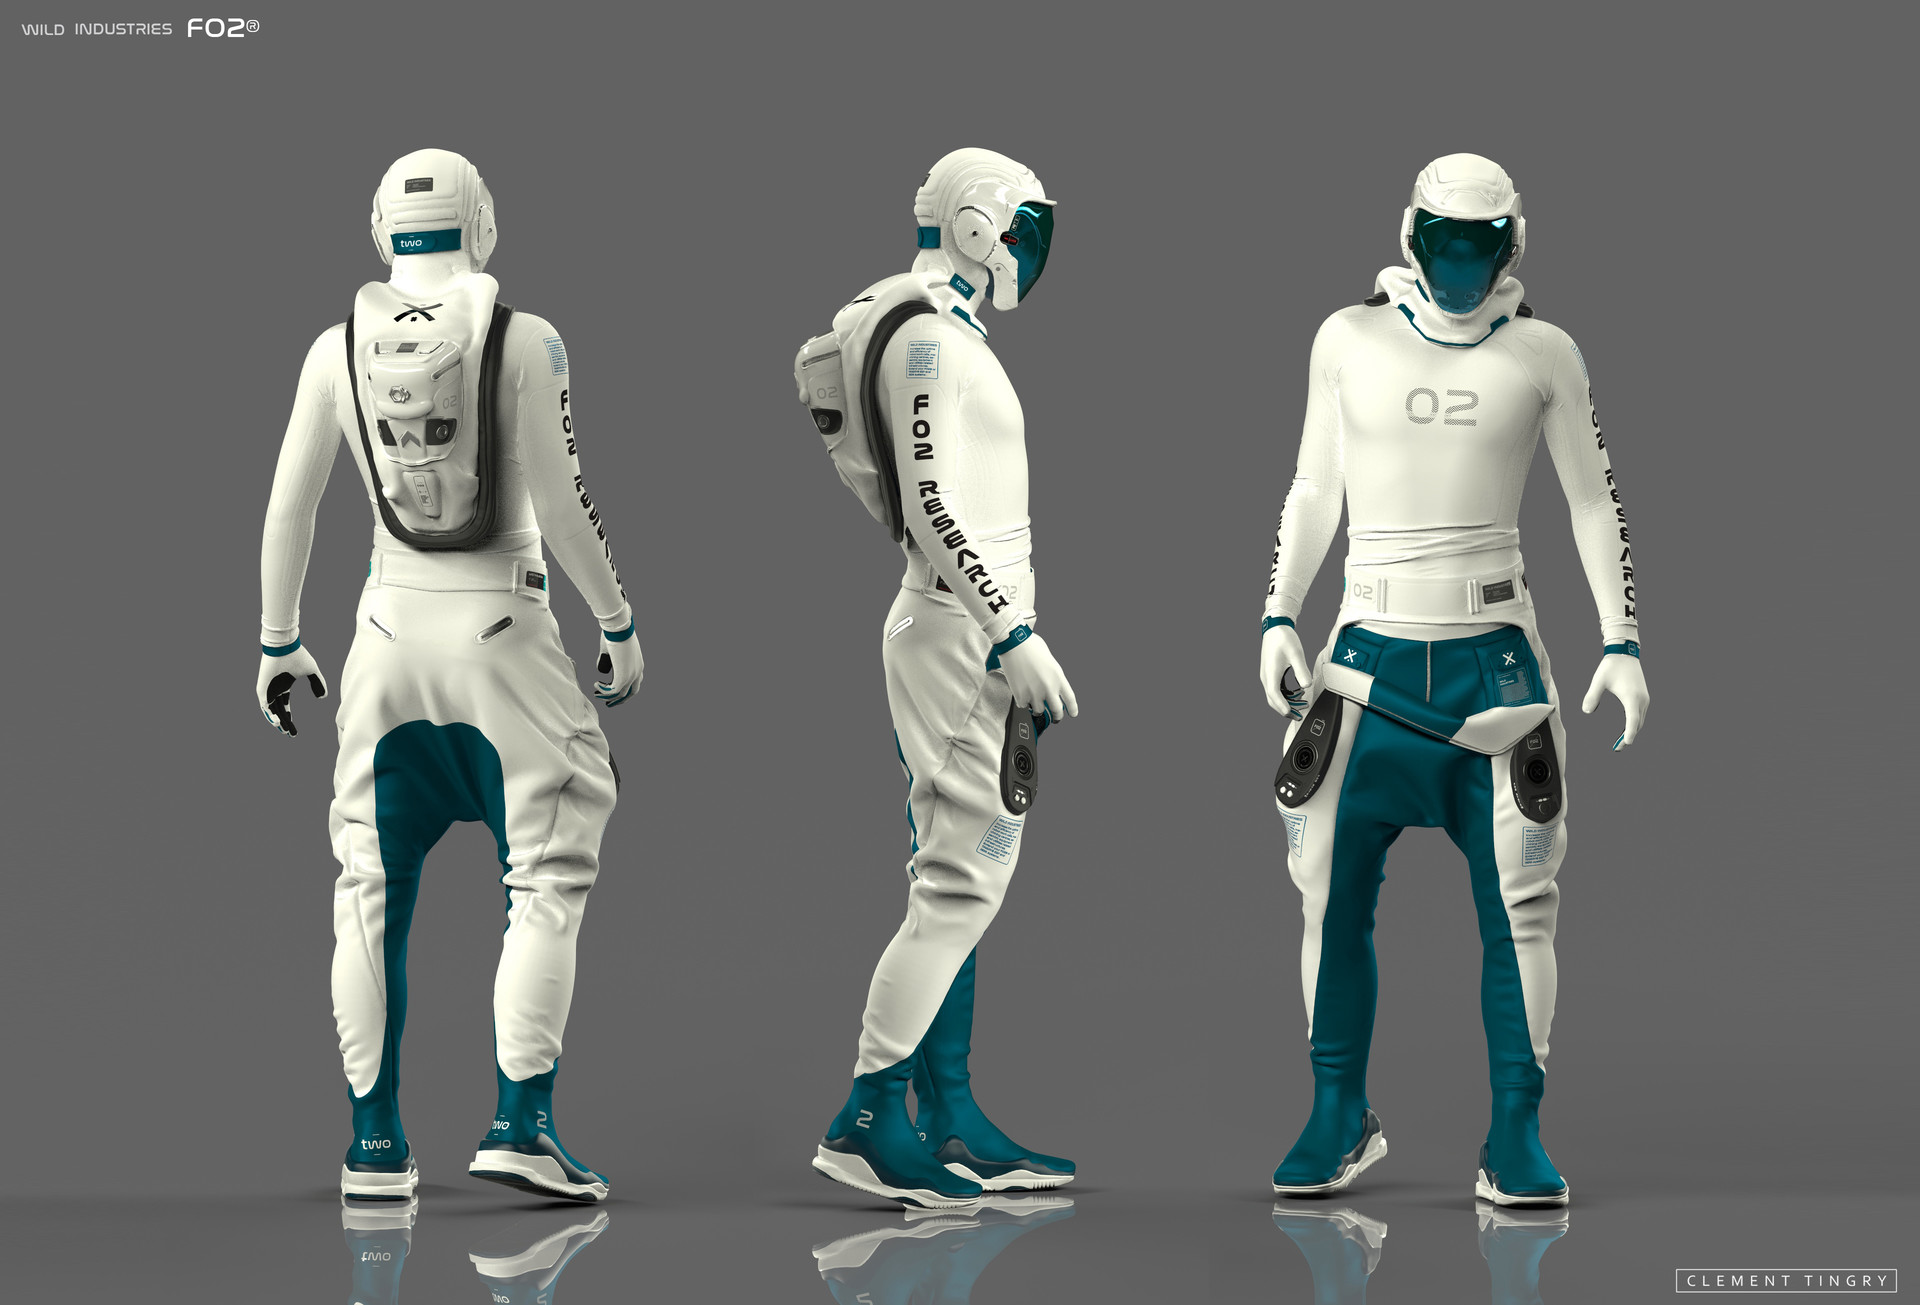 clement tingry 02 fo2 - 5 Futuristic Sci-Fi Space Suits That Will Take You to New Worlds